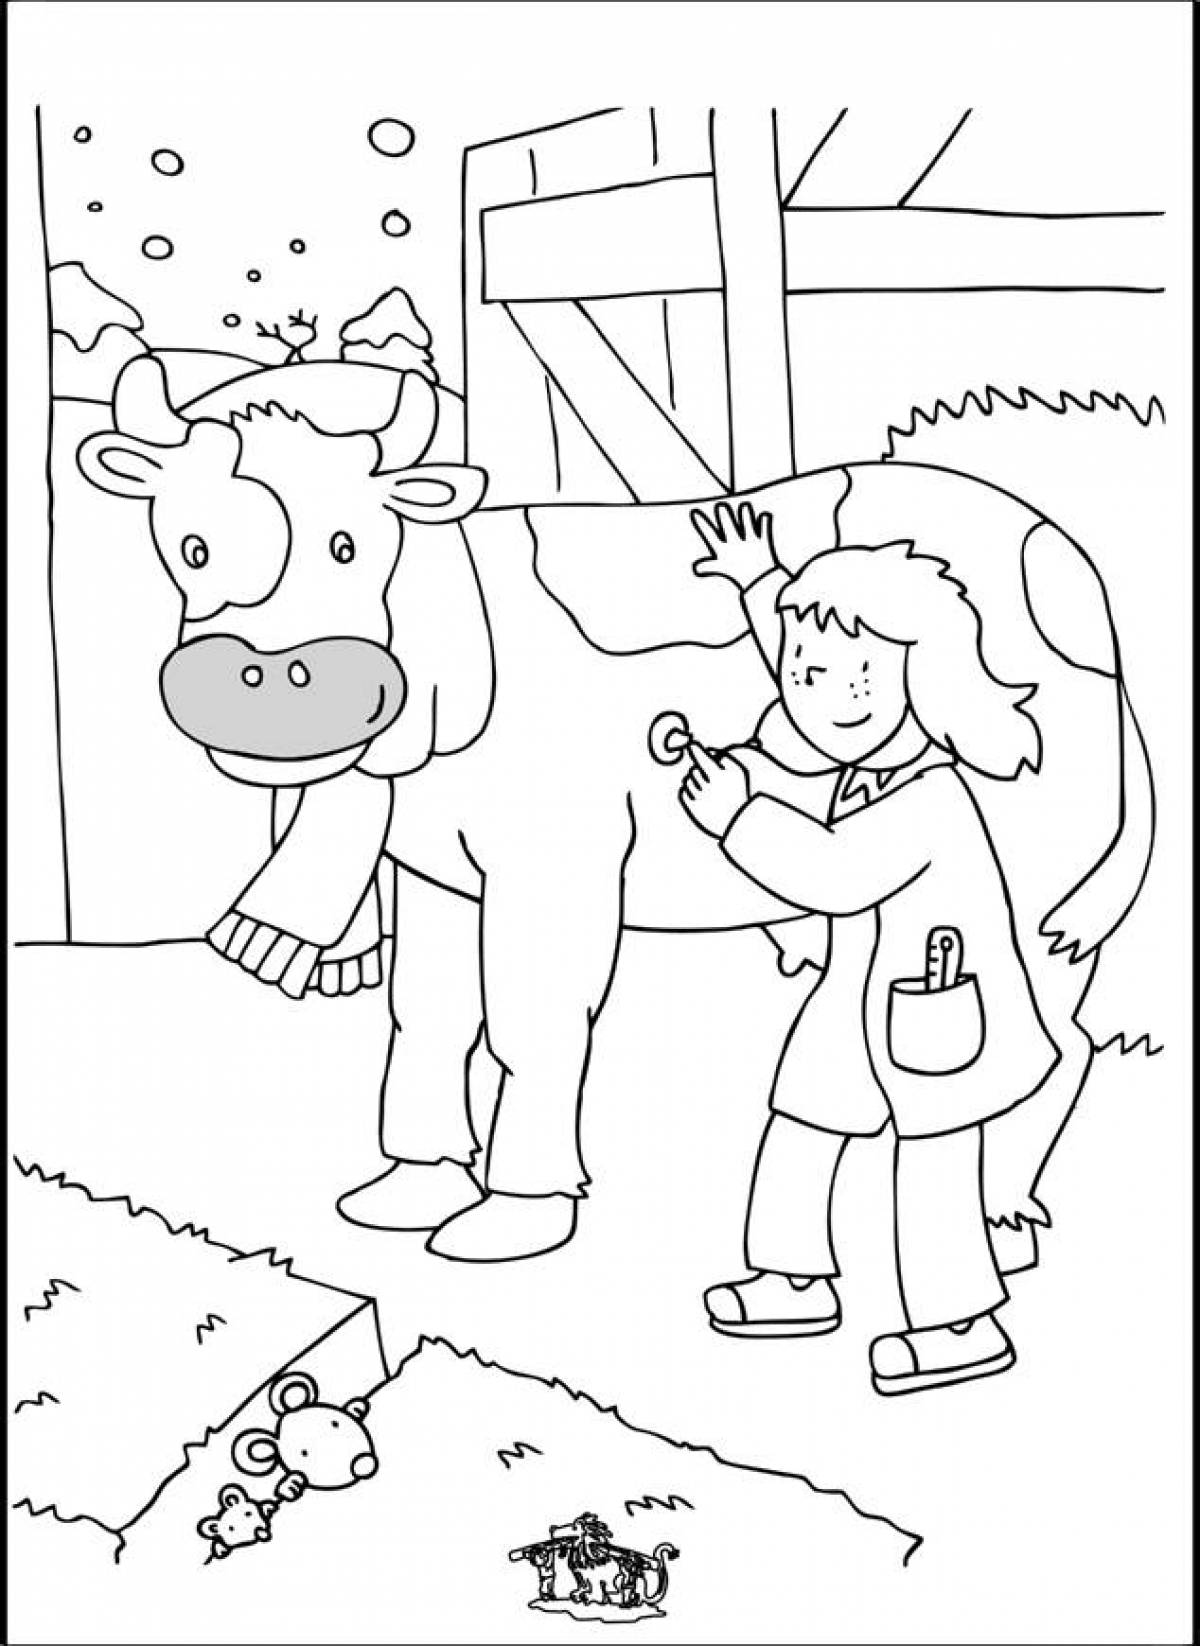 Coloring page charming veterinarian